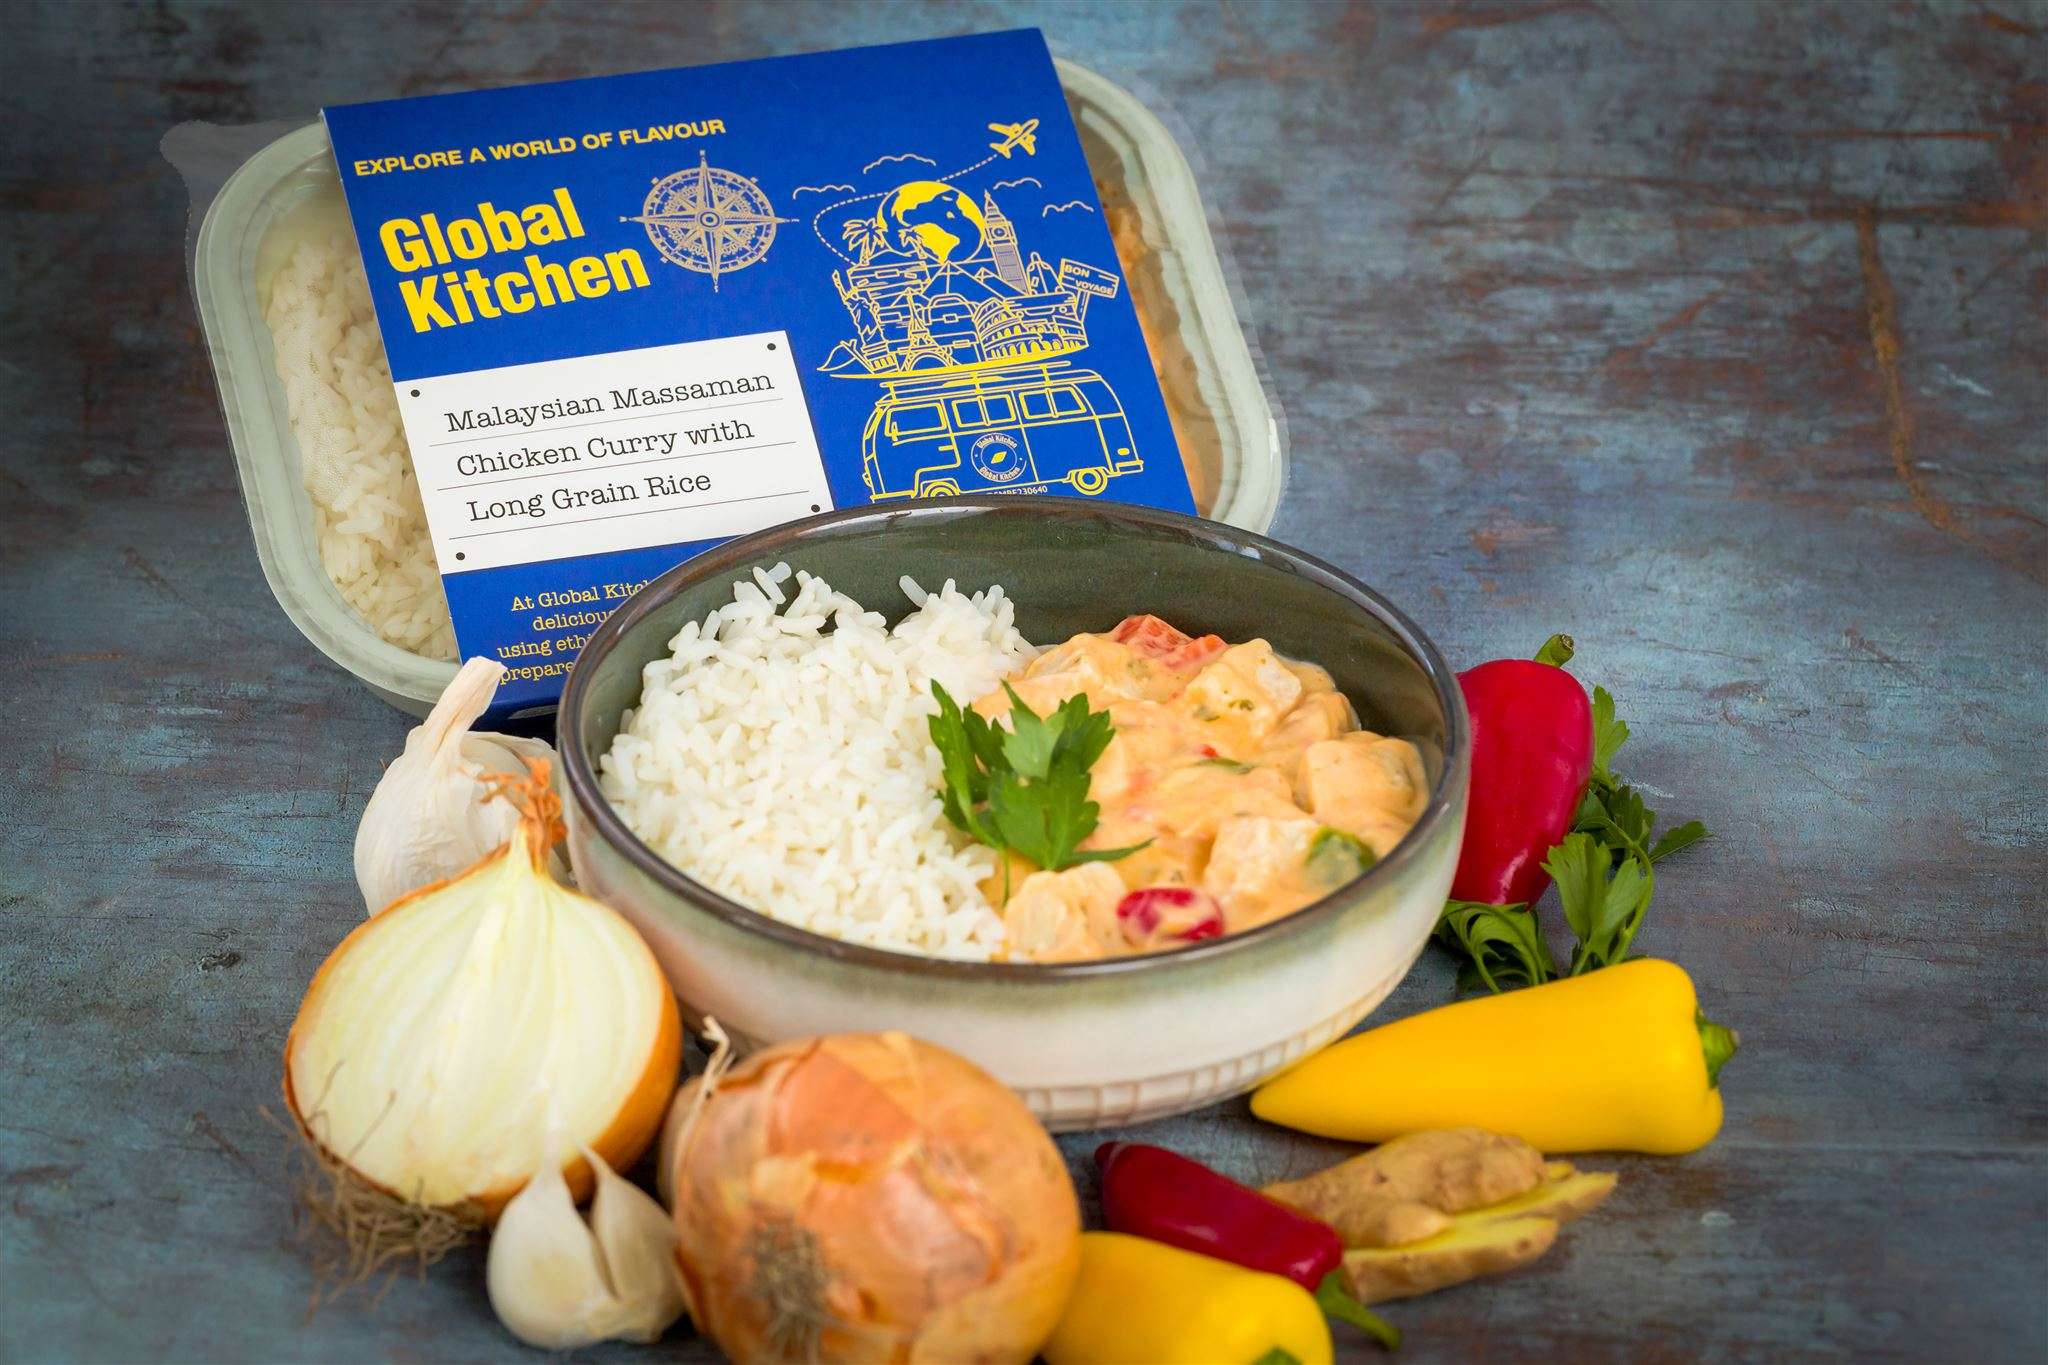 Malaysian Massaman Chicken Curry with Long Grain Rice - plate